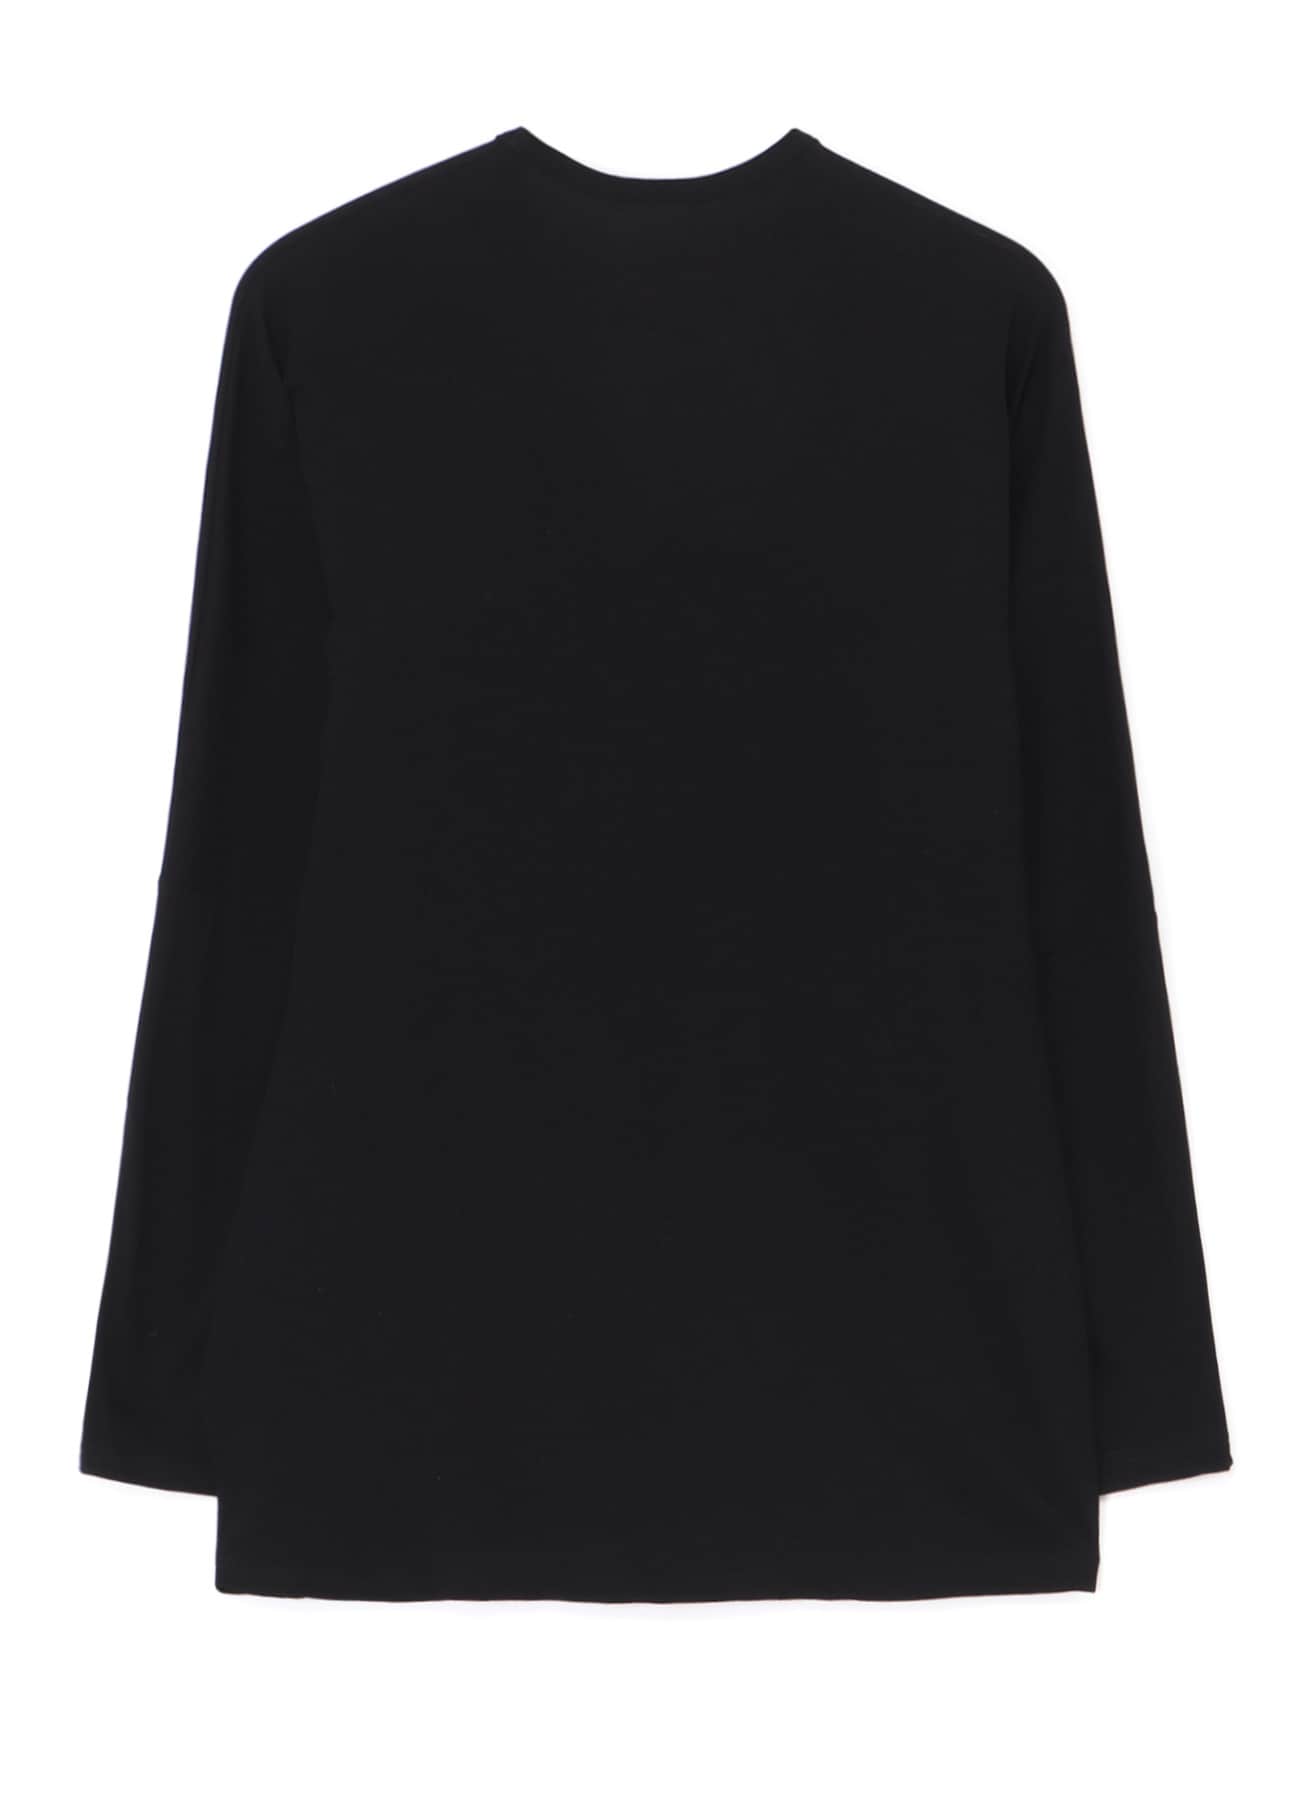 TUCK DETAIL ROUND NECK LONG SLEEVE T-SHIRT